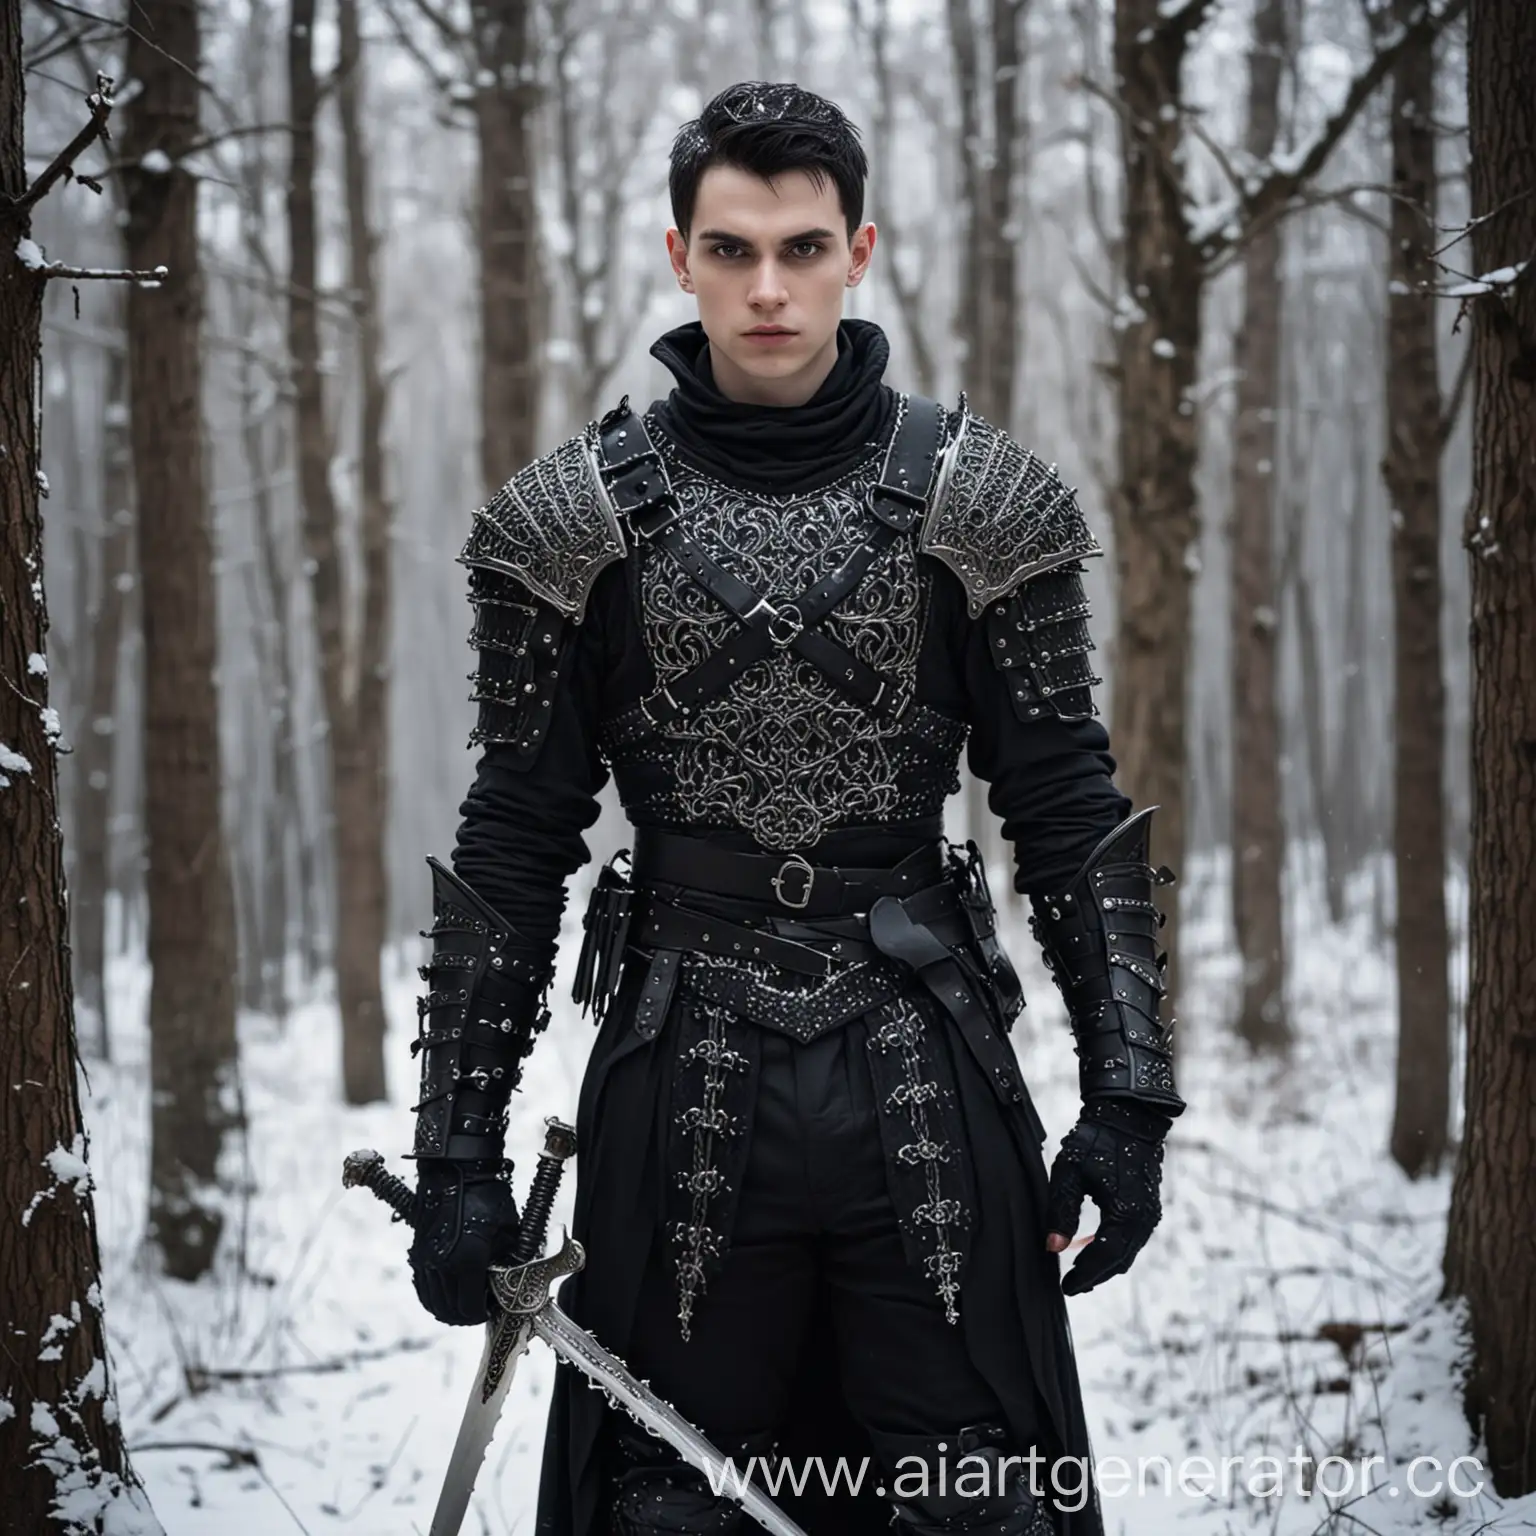 young man, warrior, short dark hair, pale skin, dark eyes, very thin lips, clean-shaven face, full height, wearing black chainmail and armor, sword on his hip, dark winter forest background, trees in the snow, gothic fantasy style